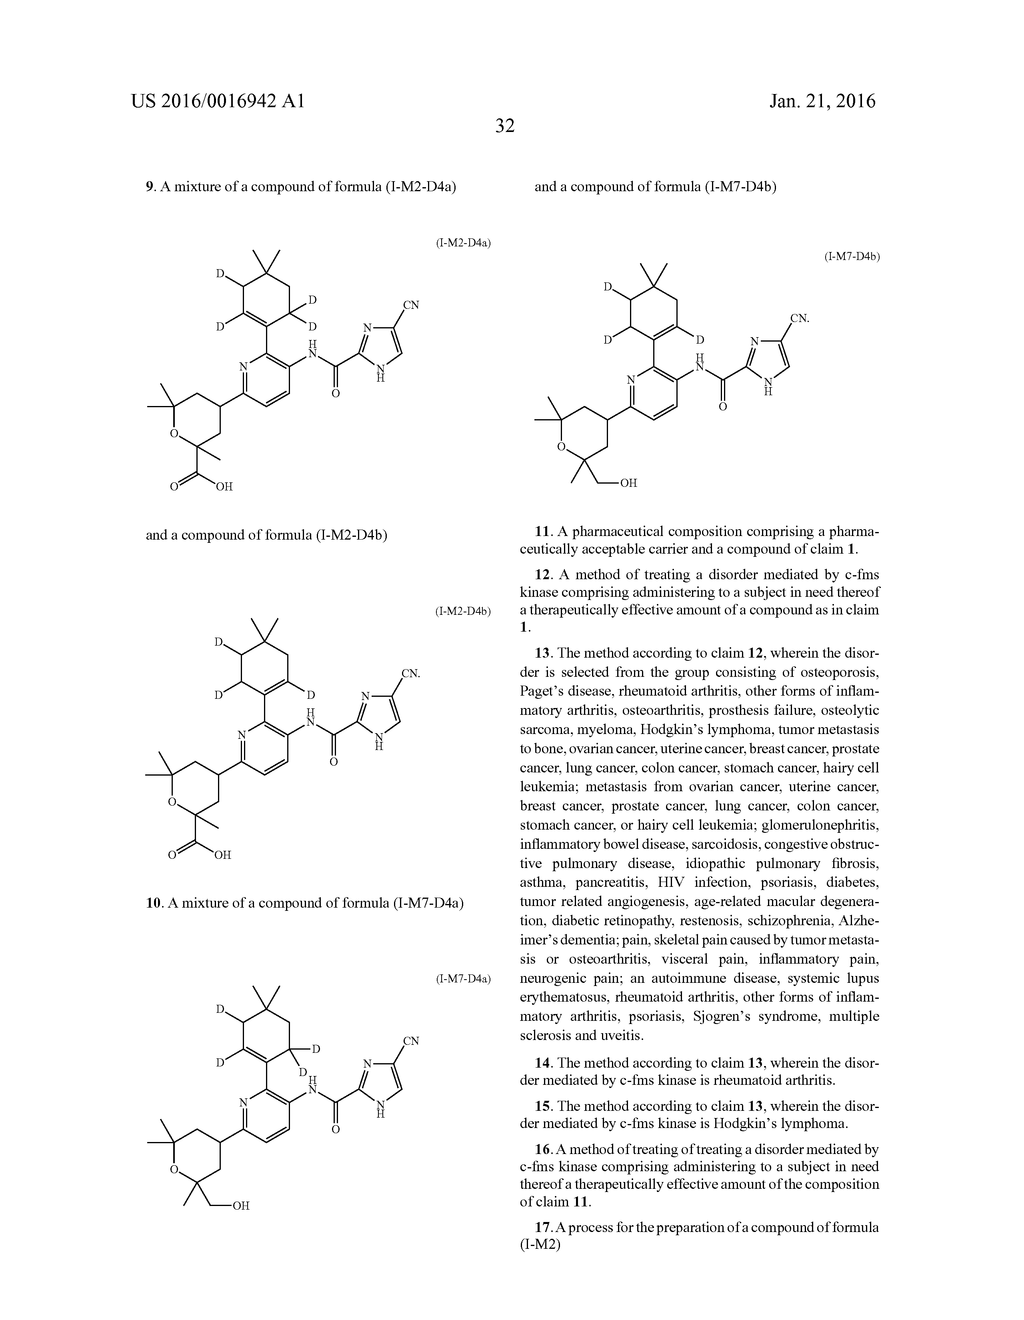 SUBSTITUTED PYRIDINE DERIVATIVES USEFUL AS C-FMS KINASE INHIBITORS - diagram, schematic, and image 33